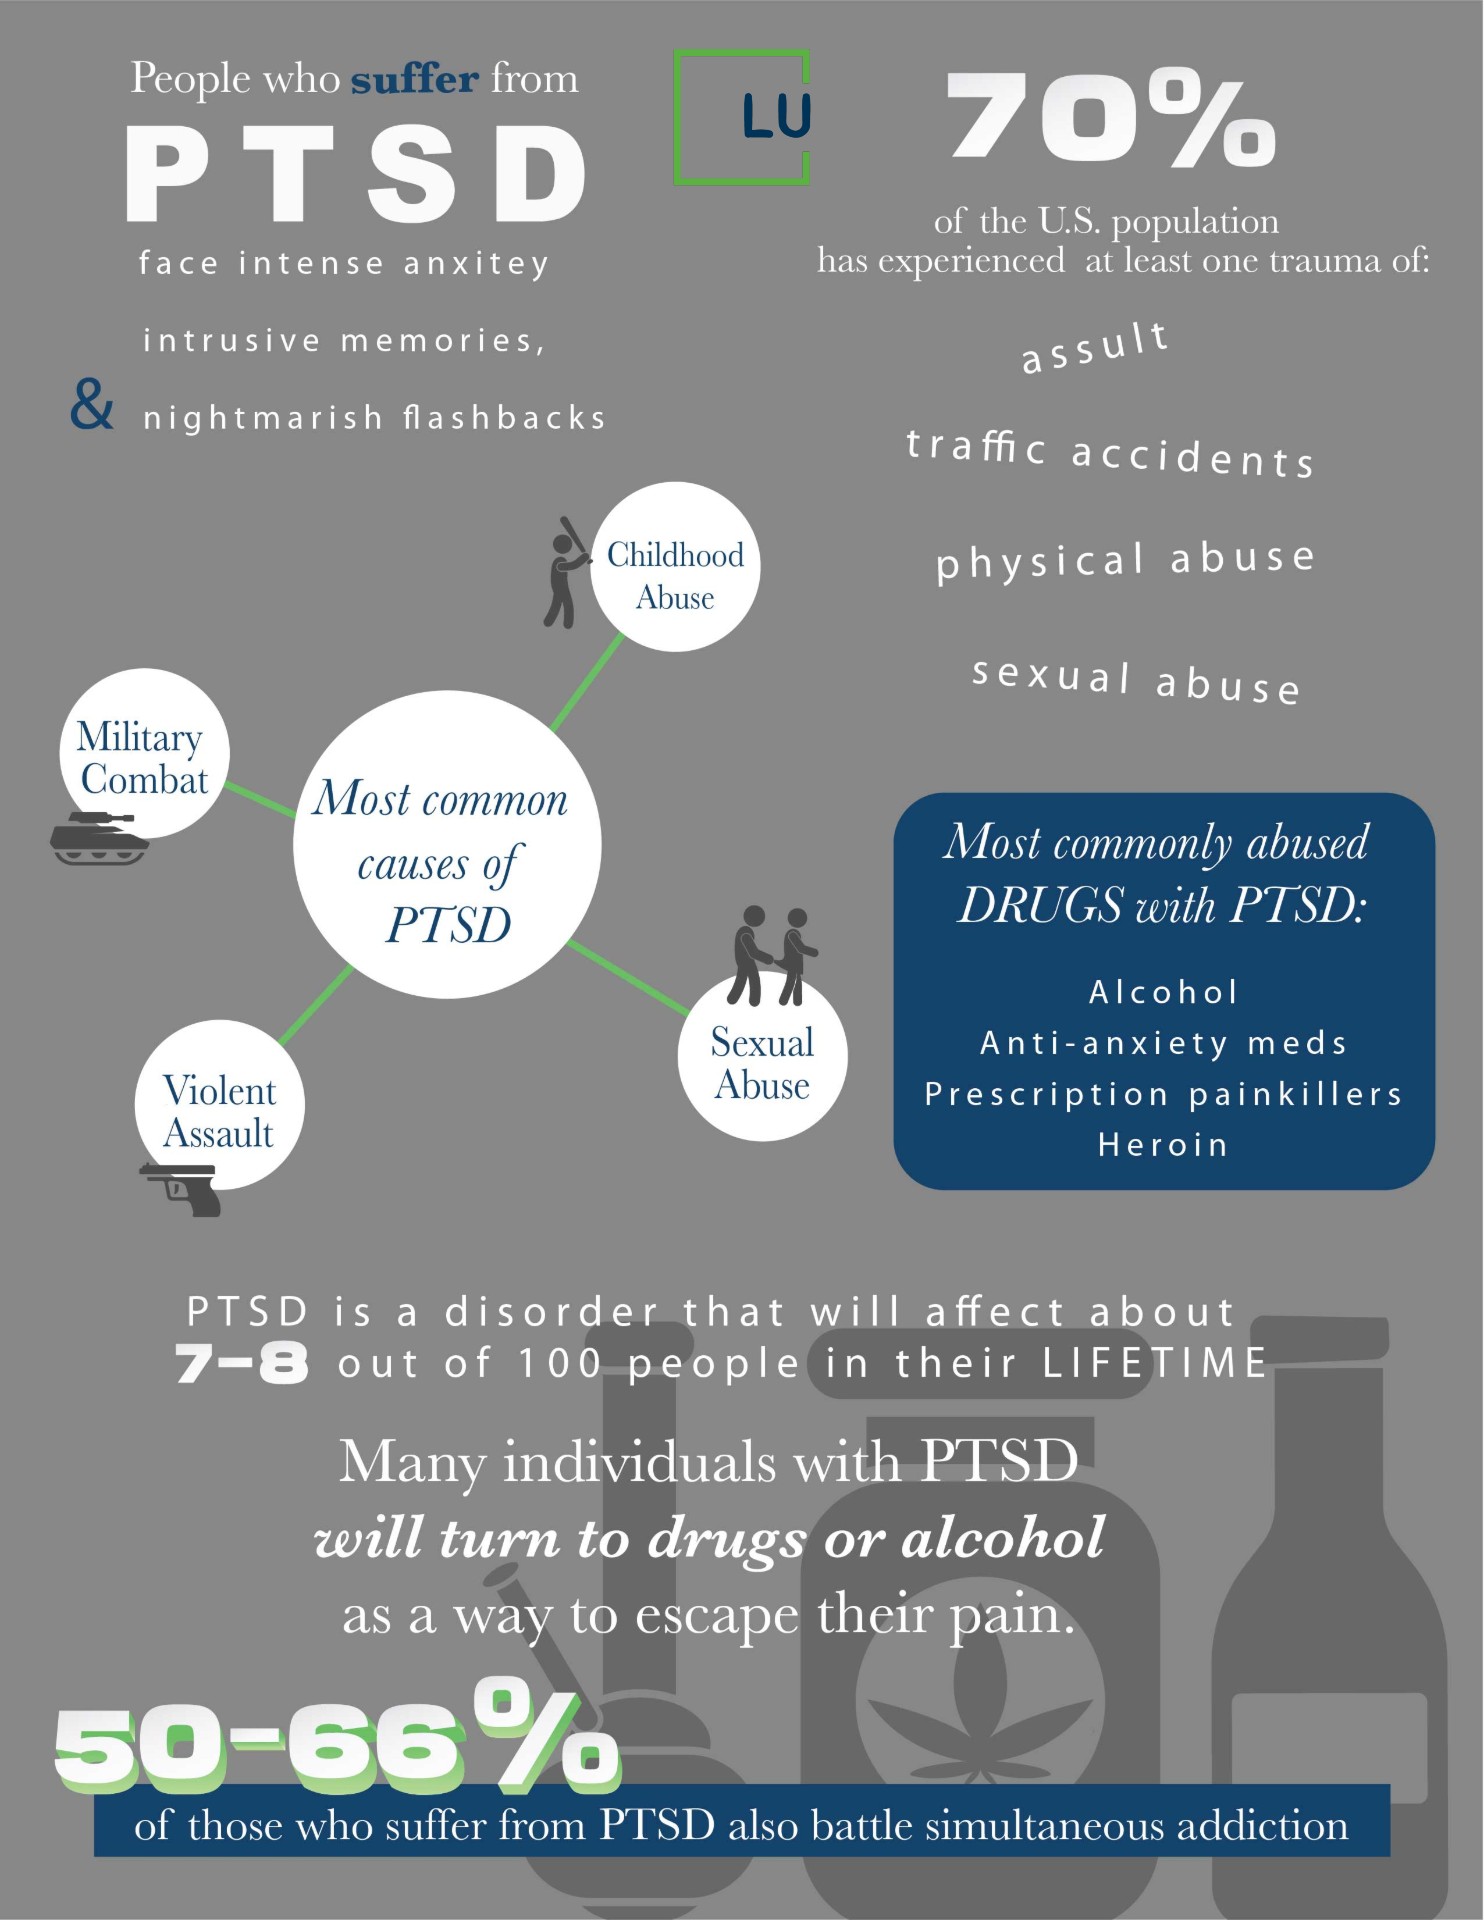 causes-of-PTSD-infographic